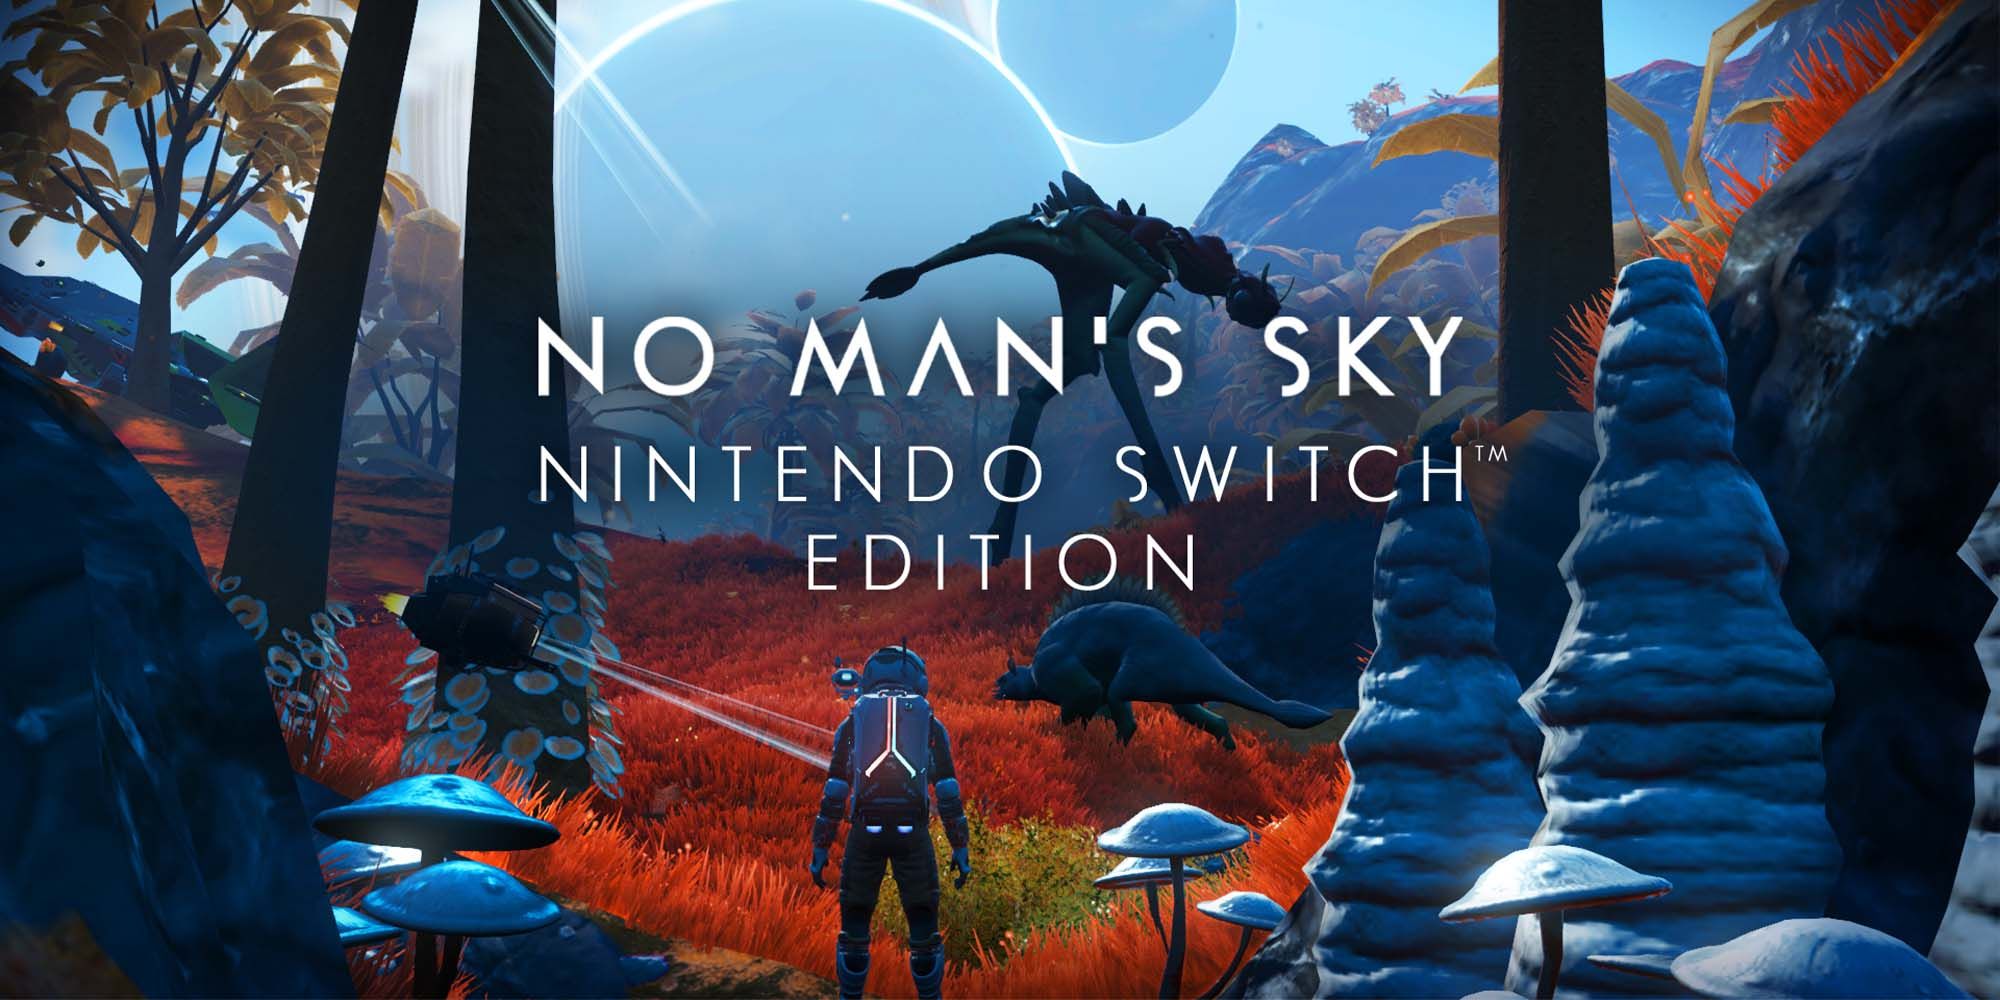 An announcement for No Man's Sky coming to Nintendo Switch